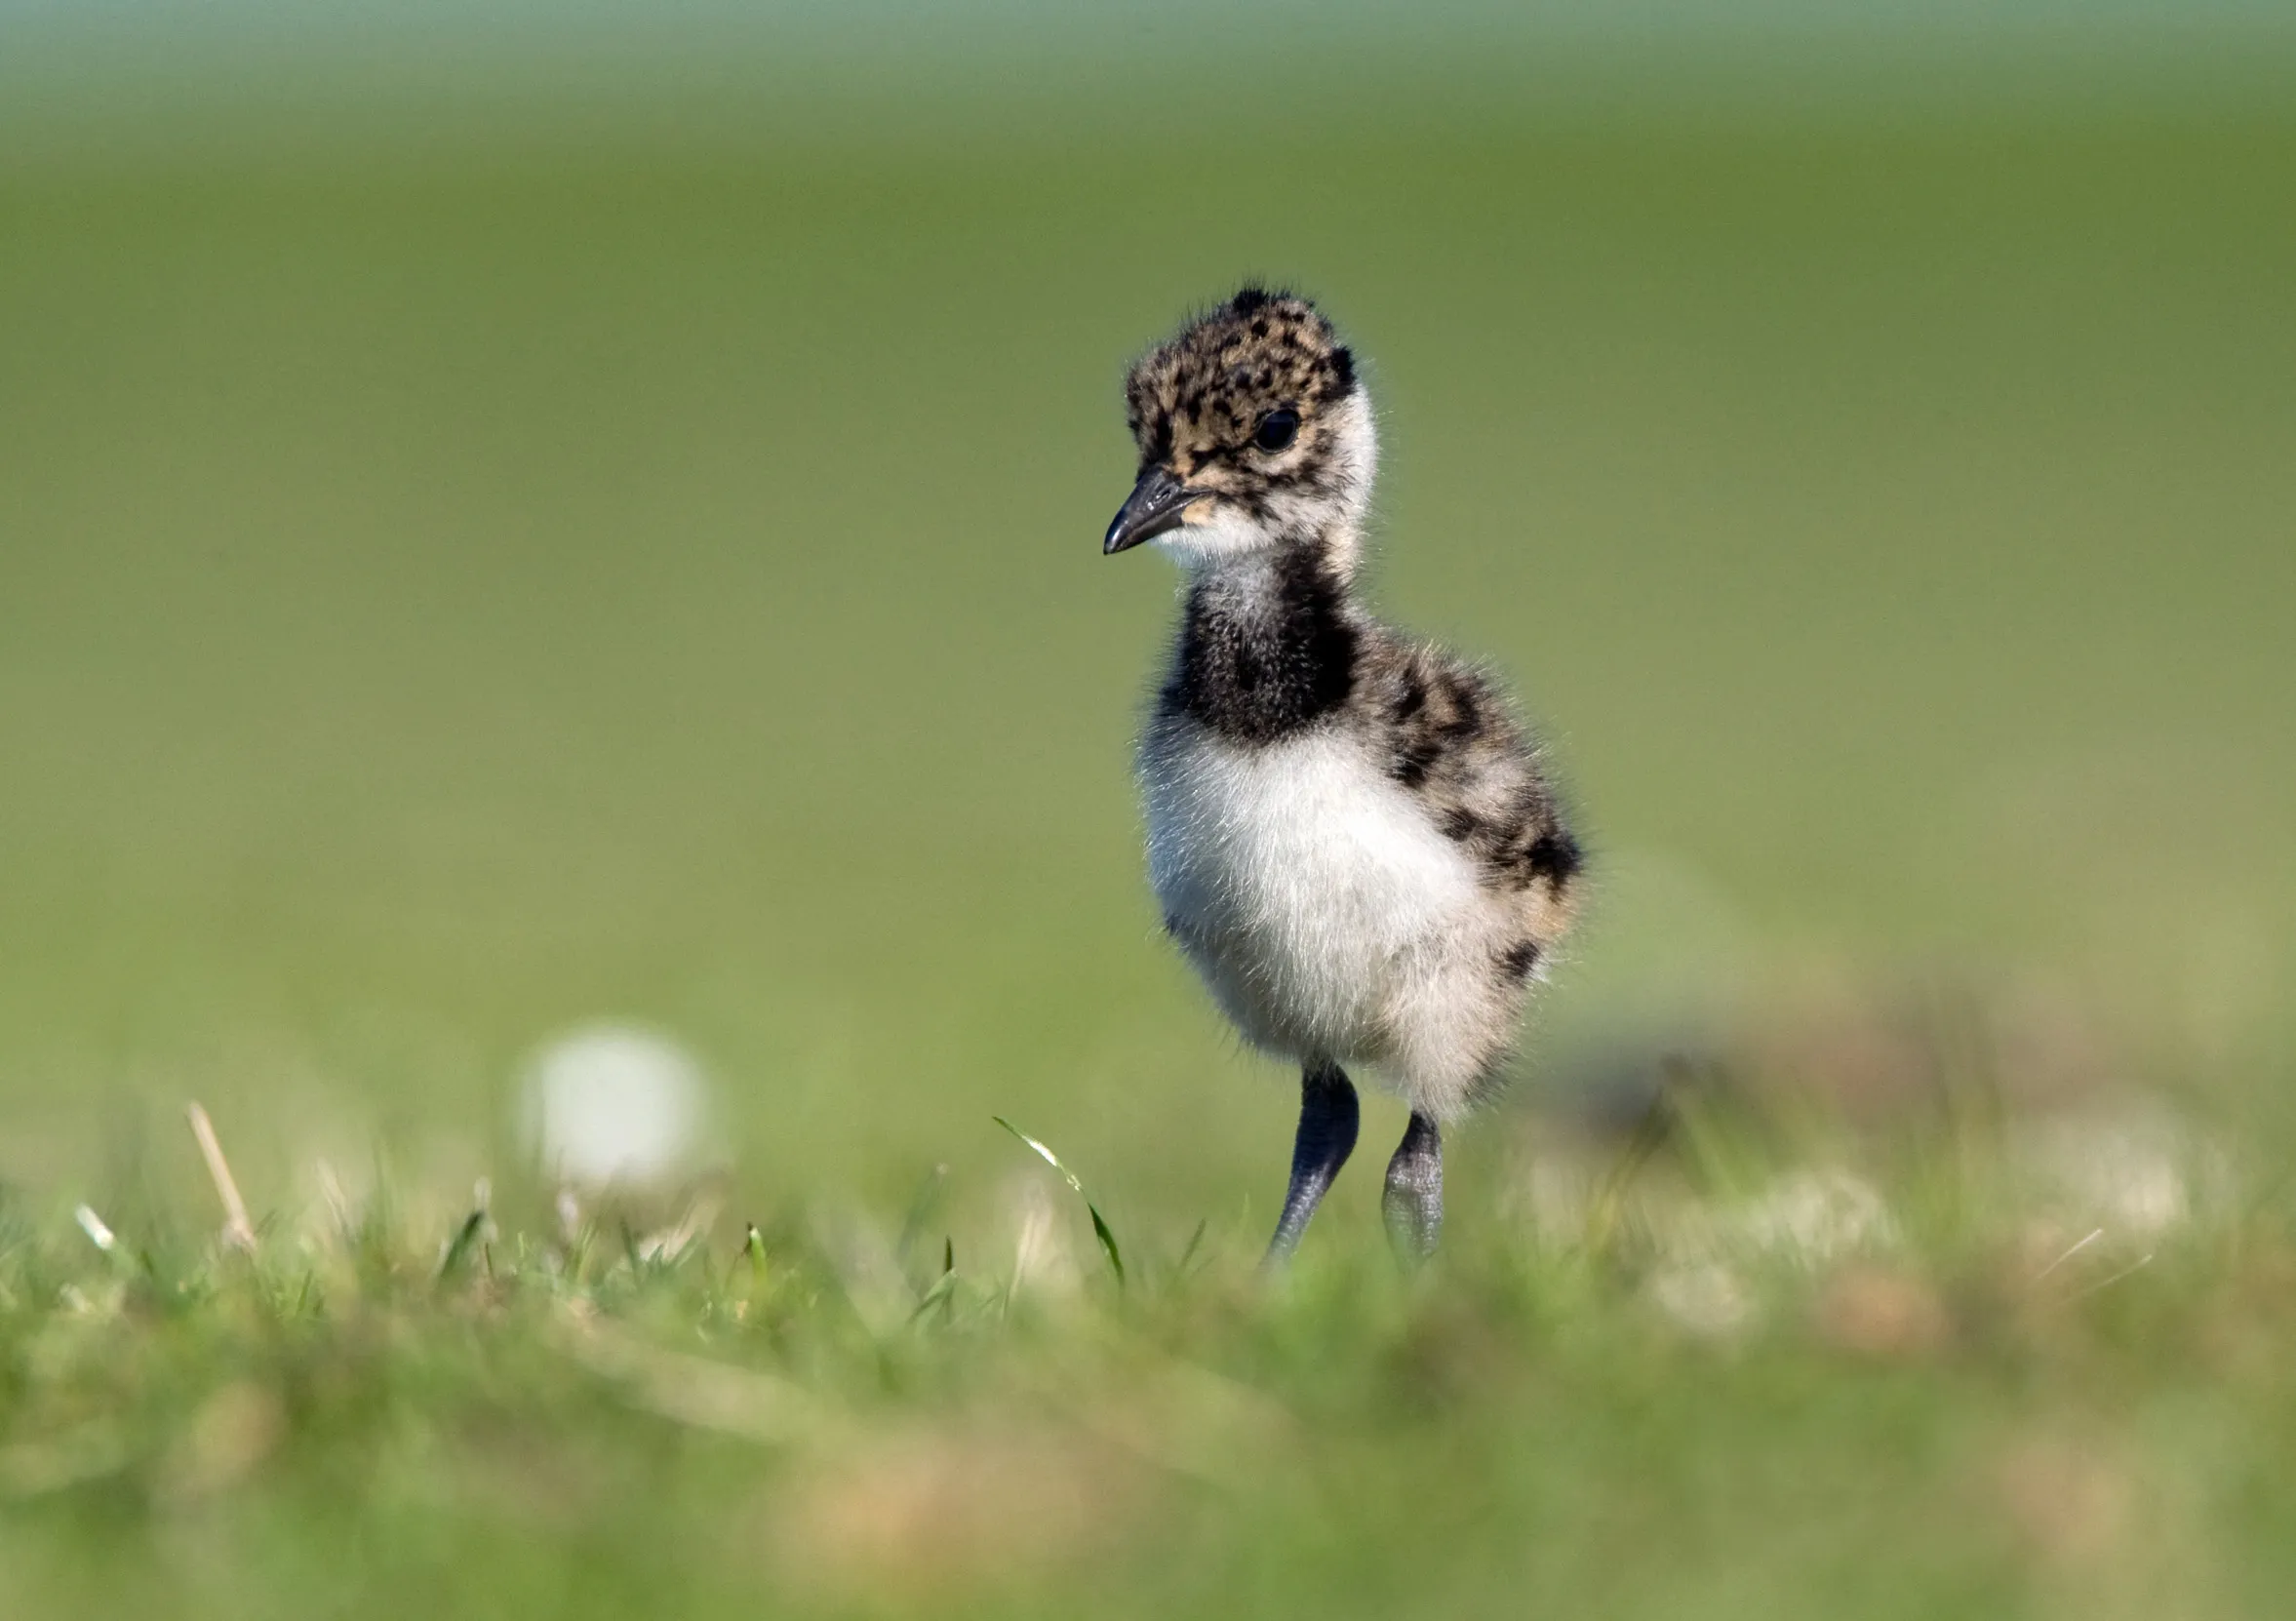 A lone Lapwing chick stood in a meadow.